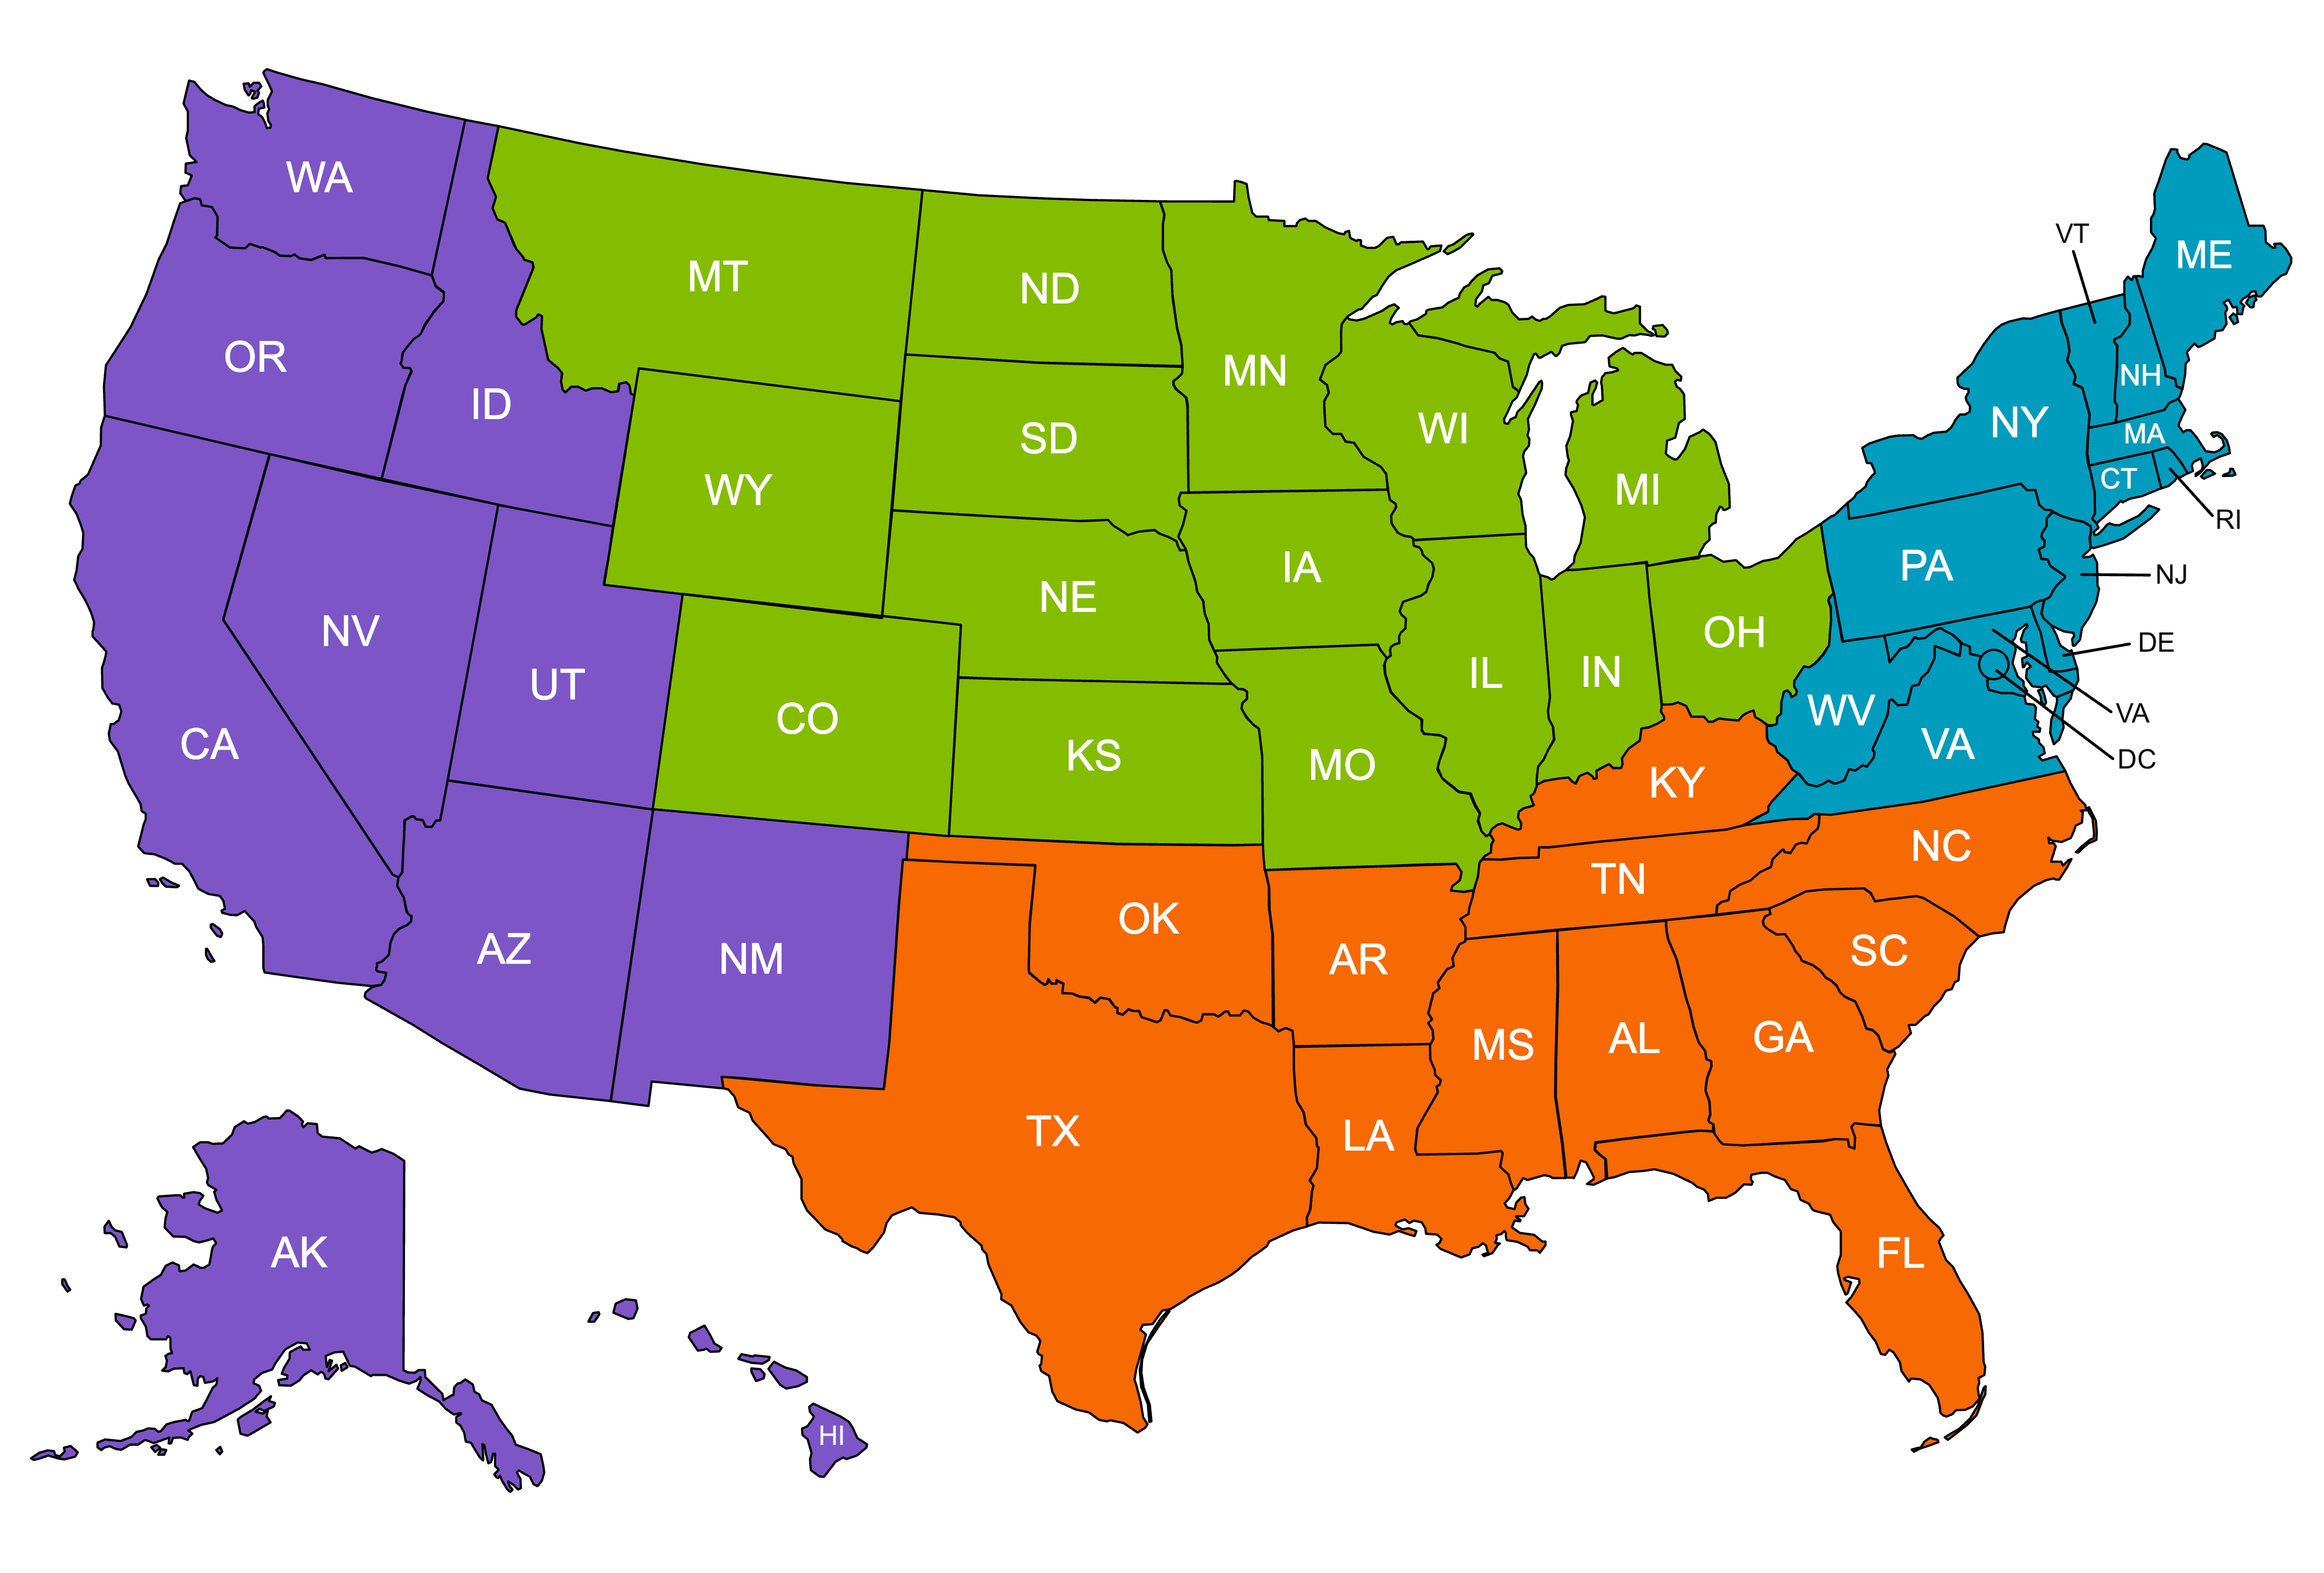 Map of the United States in four different colors depicting West, Southeast, Midwest, and Northeast regions. The Southeast region is colored orange and includes the states of AL, AR, FL, GA, KY, LA, MS, NC, OK, SC, TN, and TX. The Northeast region is colored blue and includes the states of CT, DE, MD, MA, ME, NH, NJ, NY, PA, RI, VA, VT, WV, and DC. The Midwest region is colored green and includes the states of CO, IL, IN, IA, KS, MI, MN, MO, MN, NE, ND, OH, SD, WI, and WY. The West region is colored purple and includes the states of AK, AZ, CA, HI, ID, NV, NM, OR, UT, and WA.